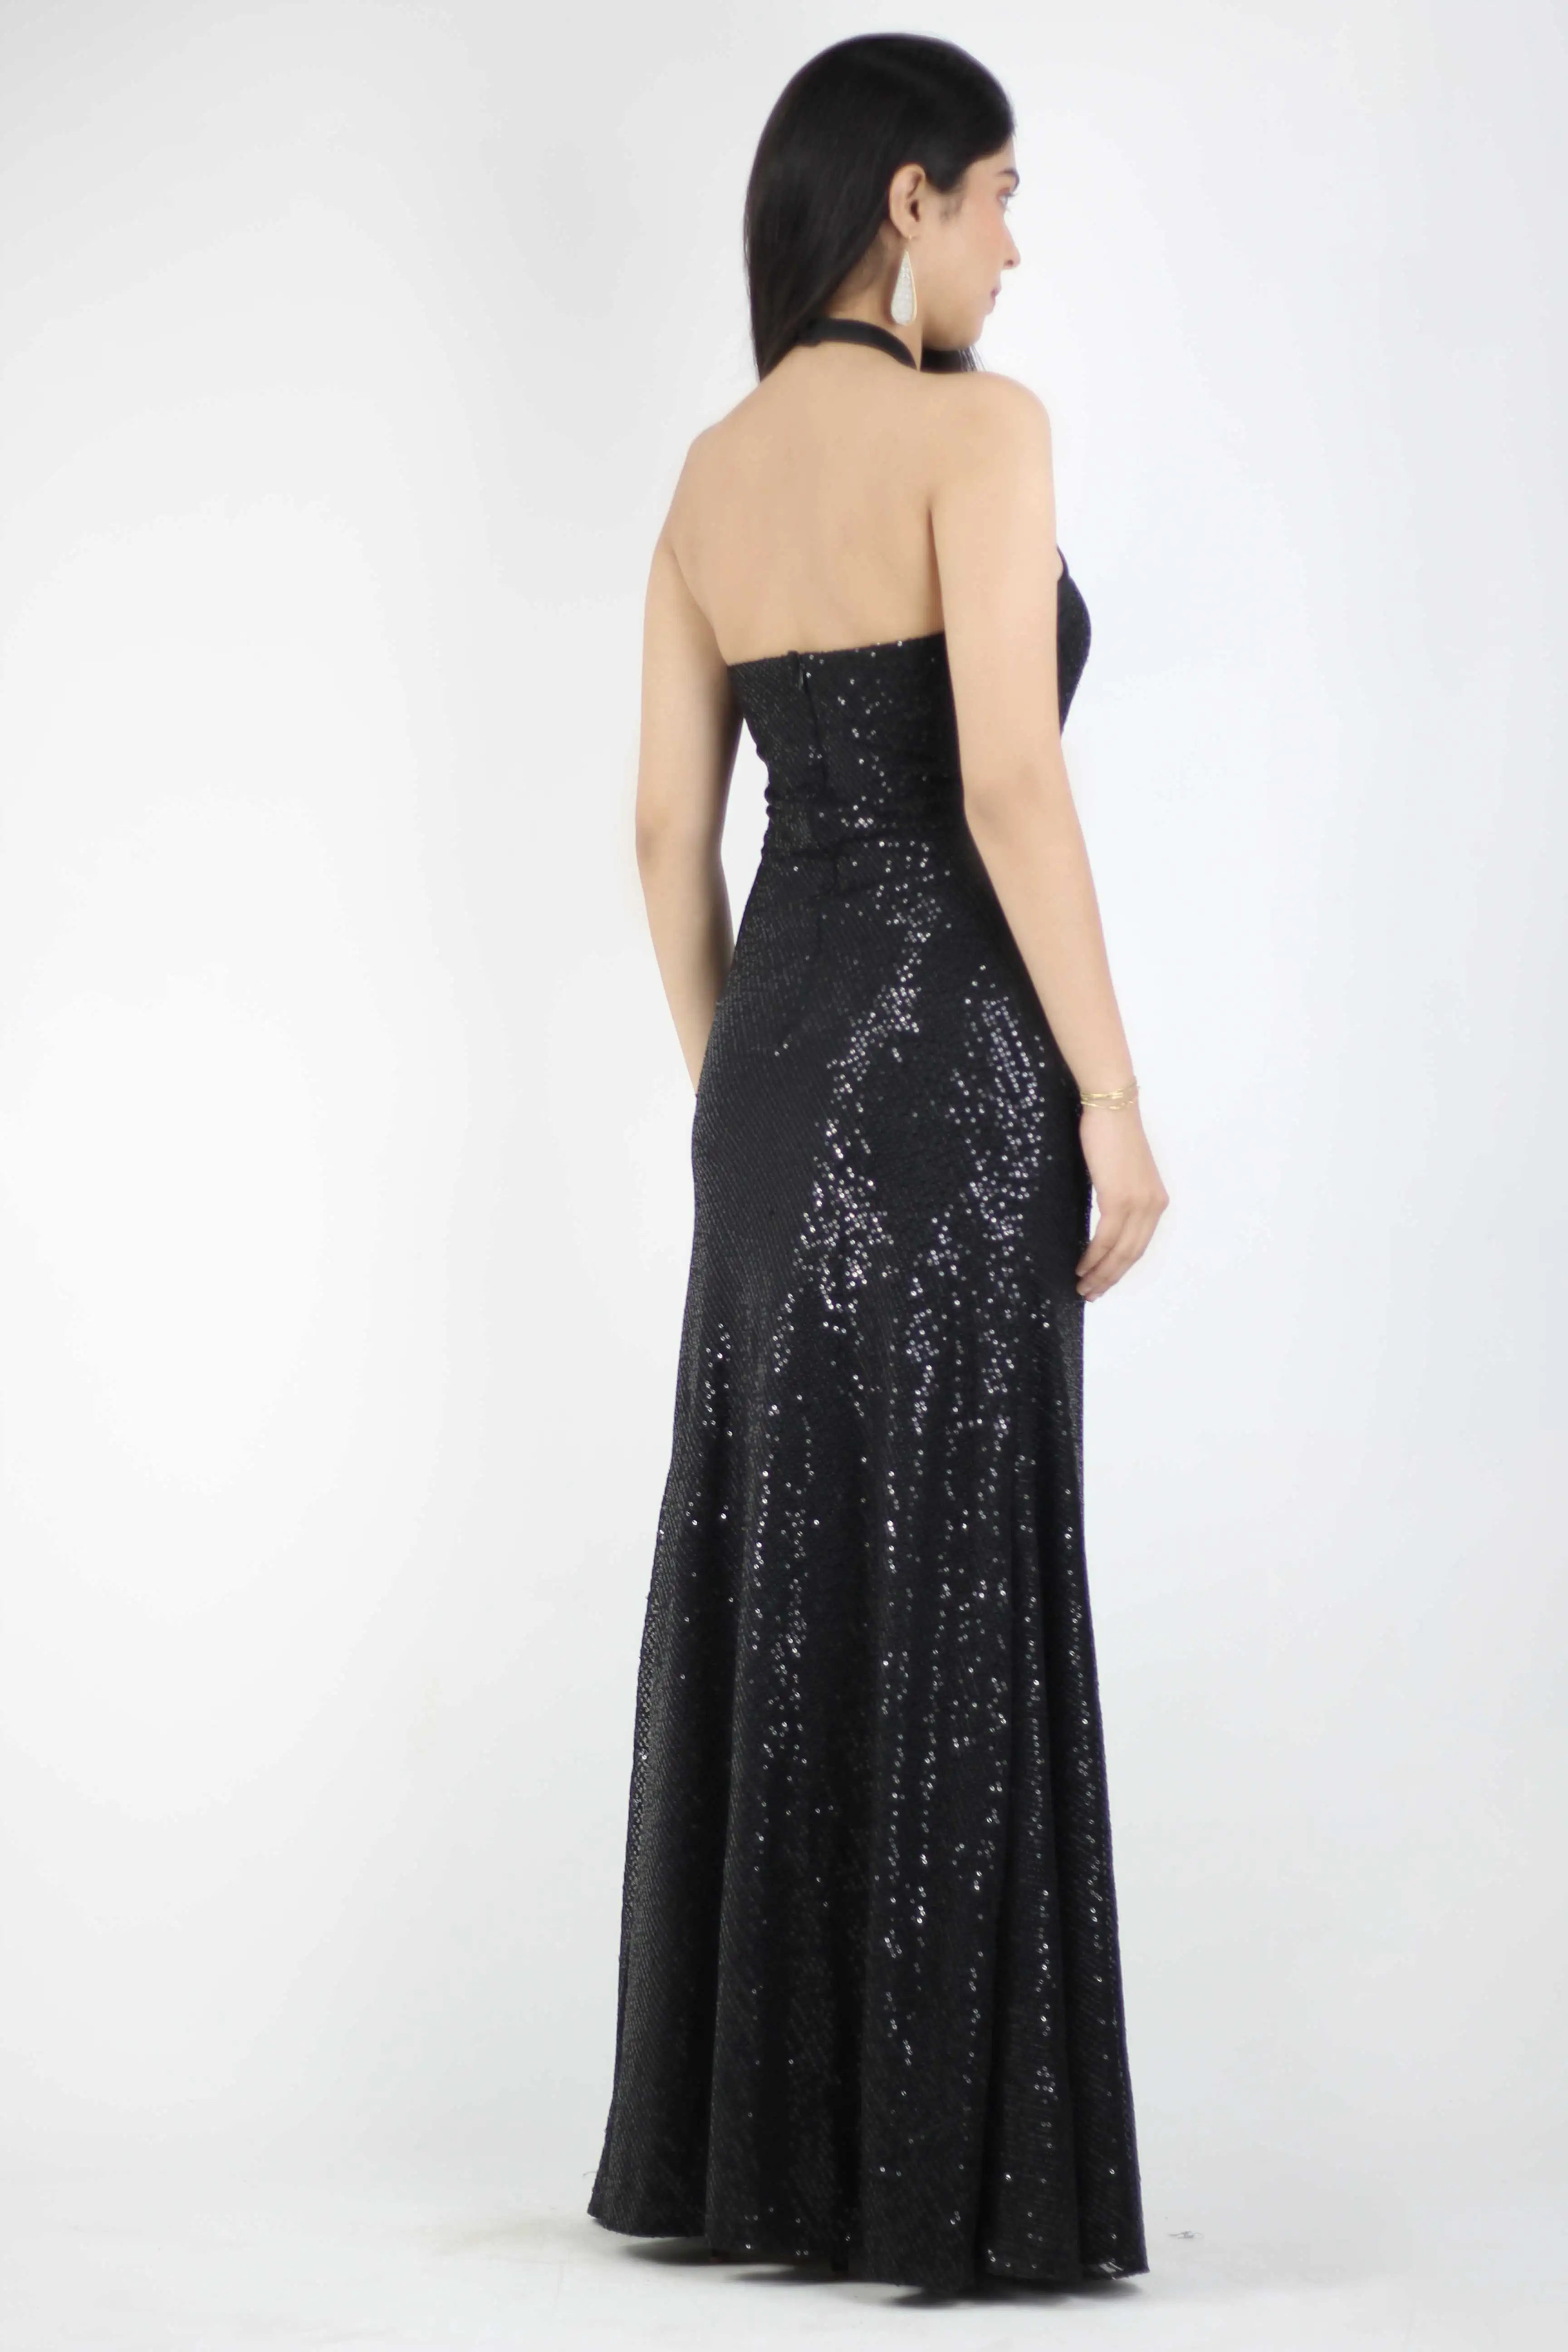 Black Sequin Party Wear Long Dress With Slit